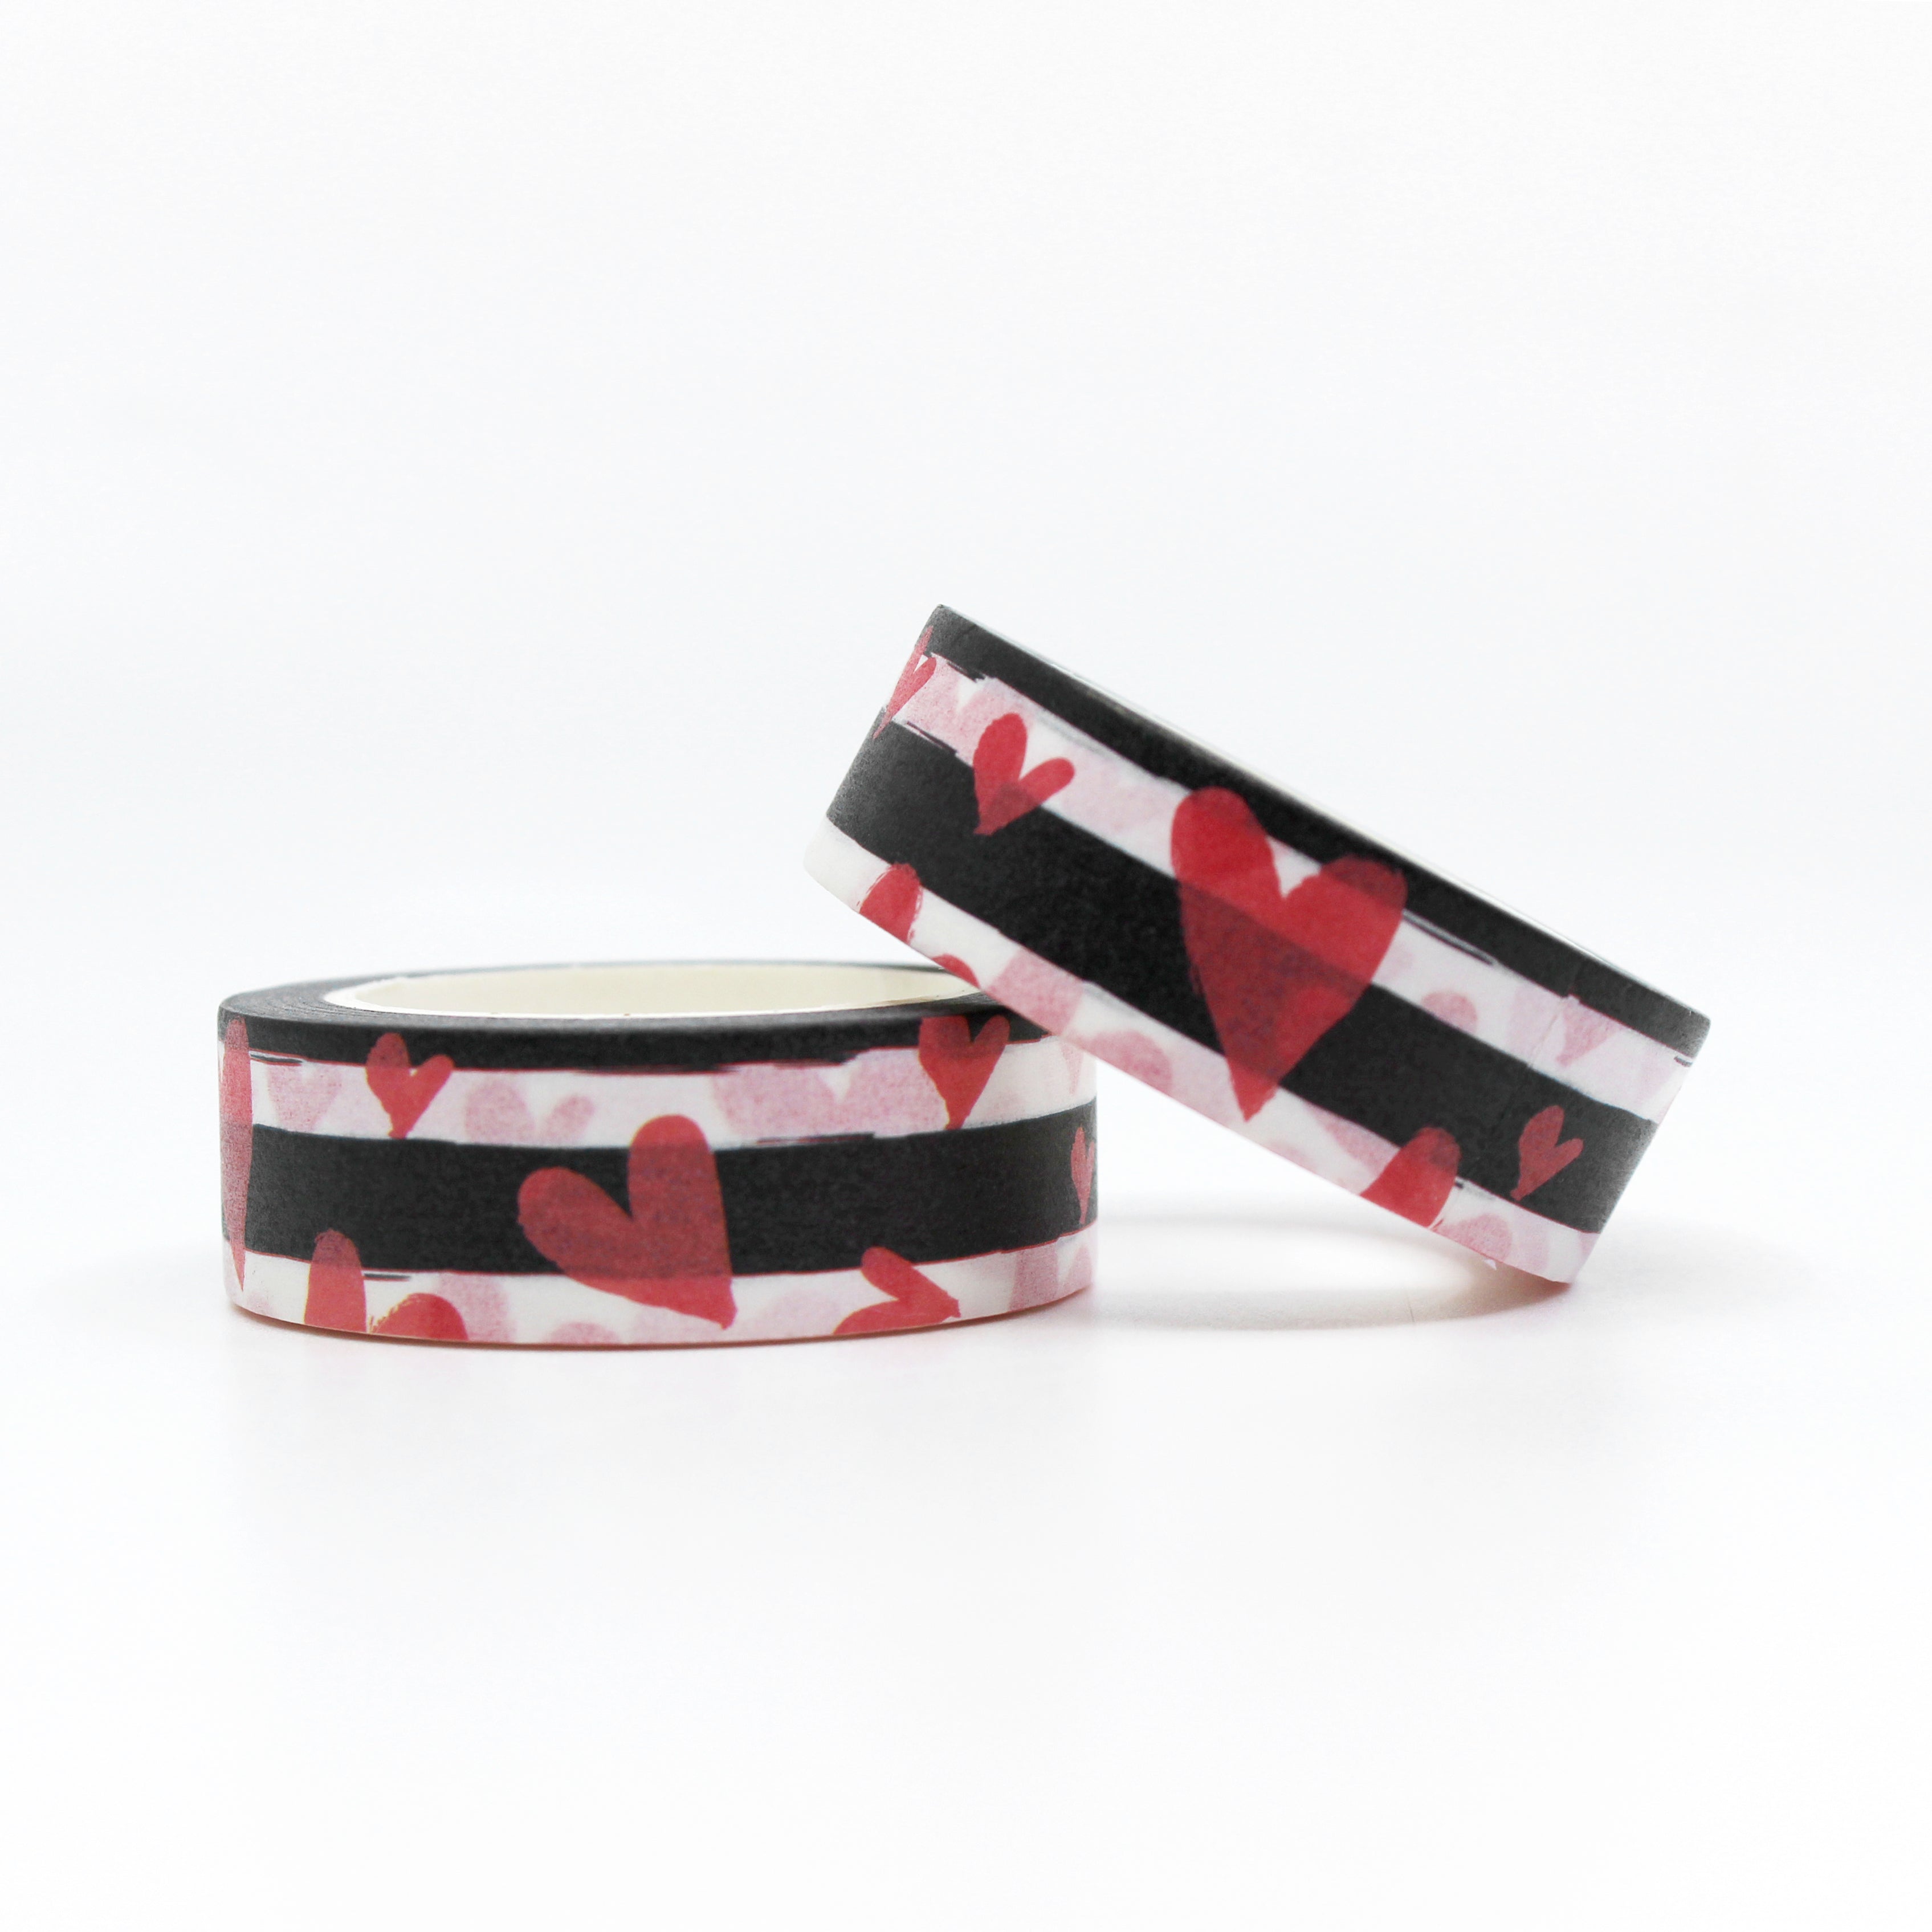 Black and White Stripe with Heart Motif Washi Tape